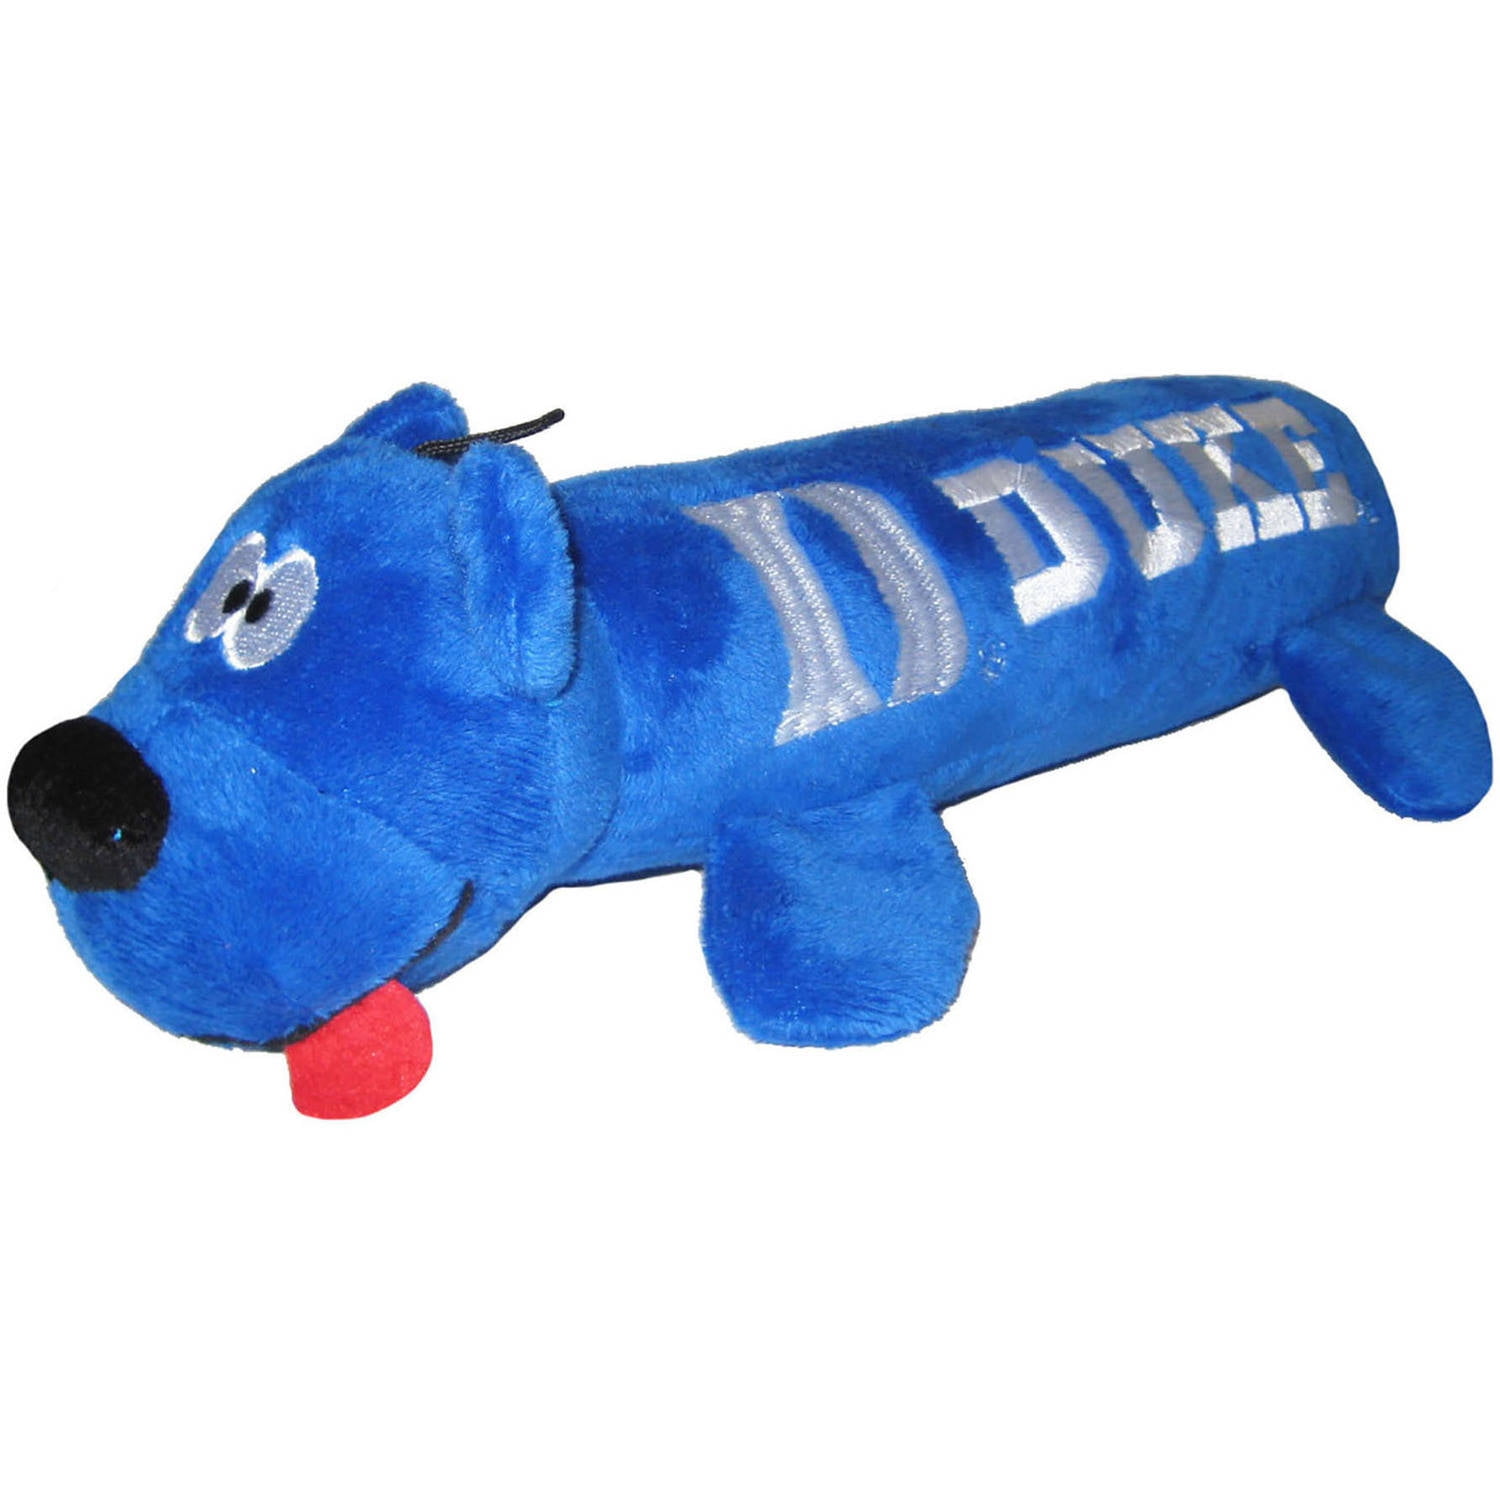 Dog Toy. Personalized Pet Toy With Embroidered Name. Durable Dog